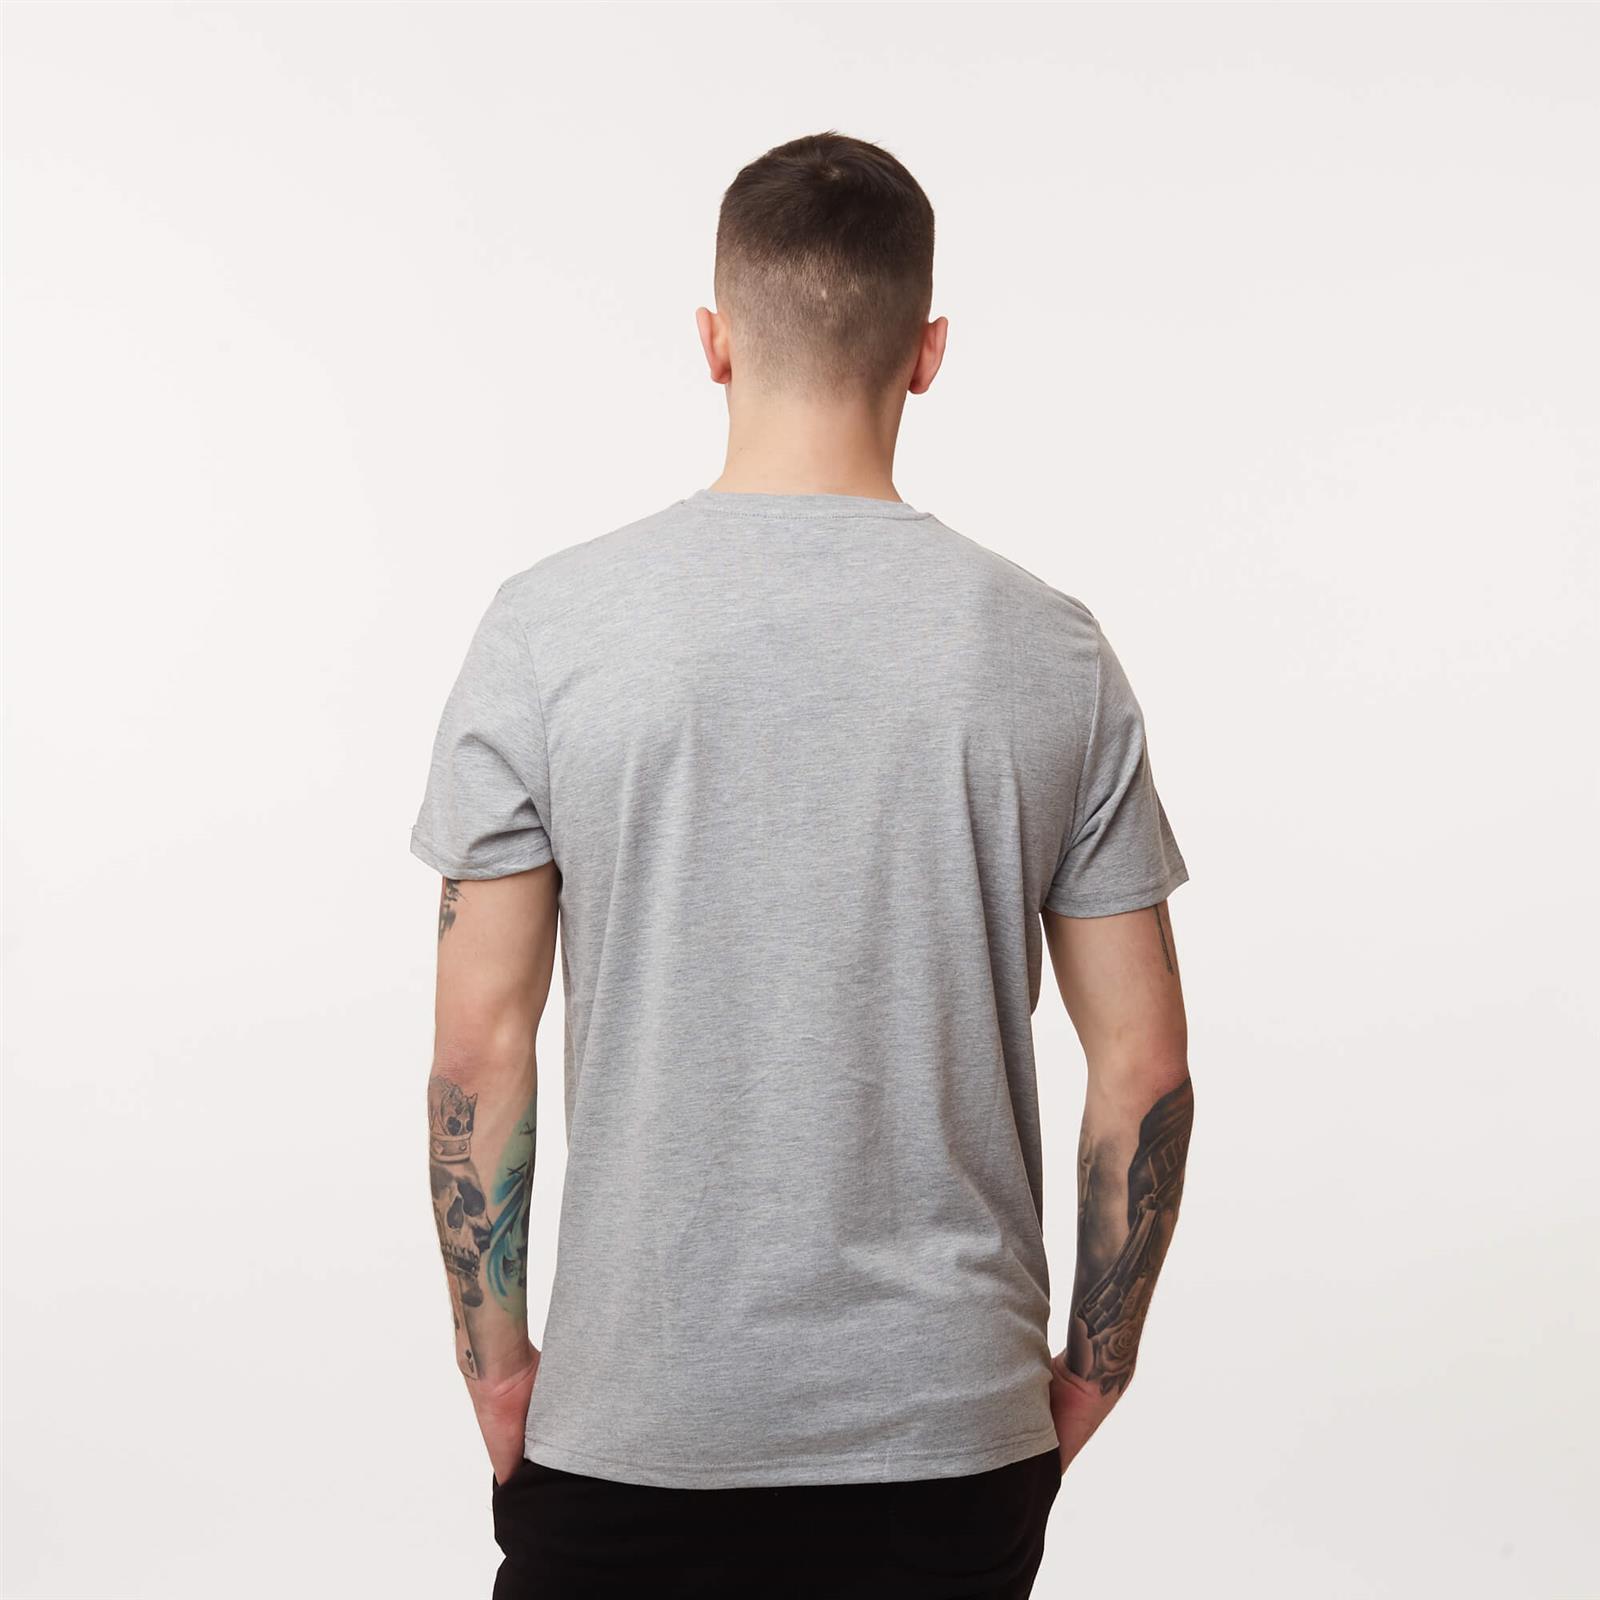 GREY \\ Men\'s T-shirts #Brands BOX \\ Alpha #Recommended Industries \\ HEATHER Ellesse Industries Brands T-SHIRT brands clothing Men \\ Alpha clothing LOGO \\ \\ | Men